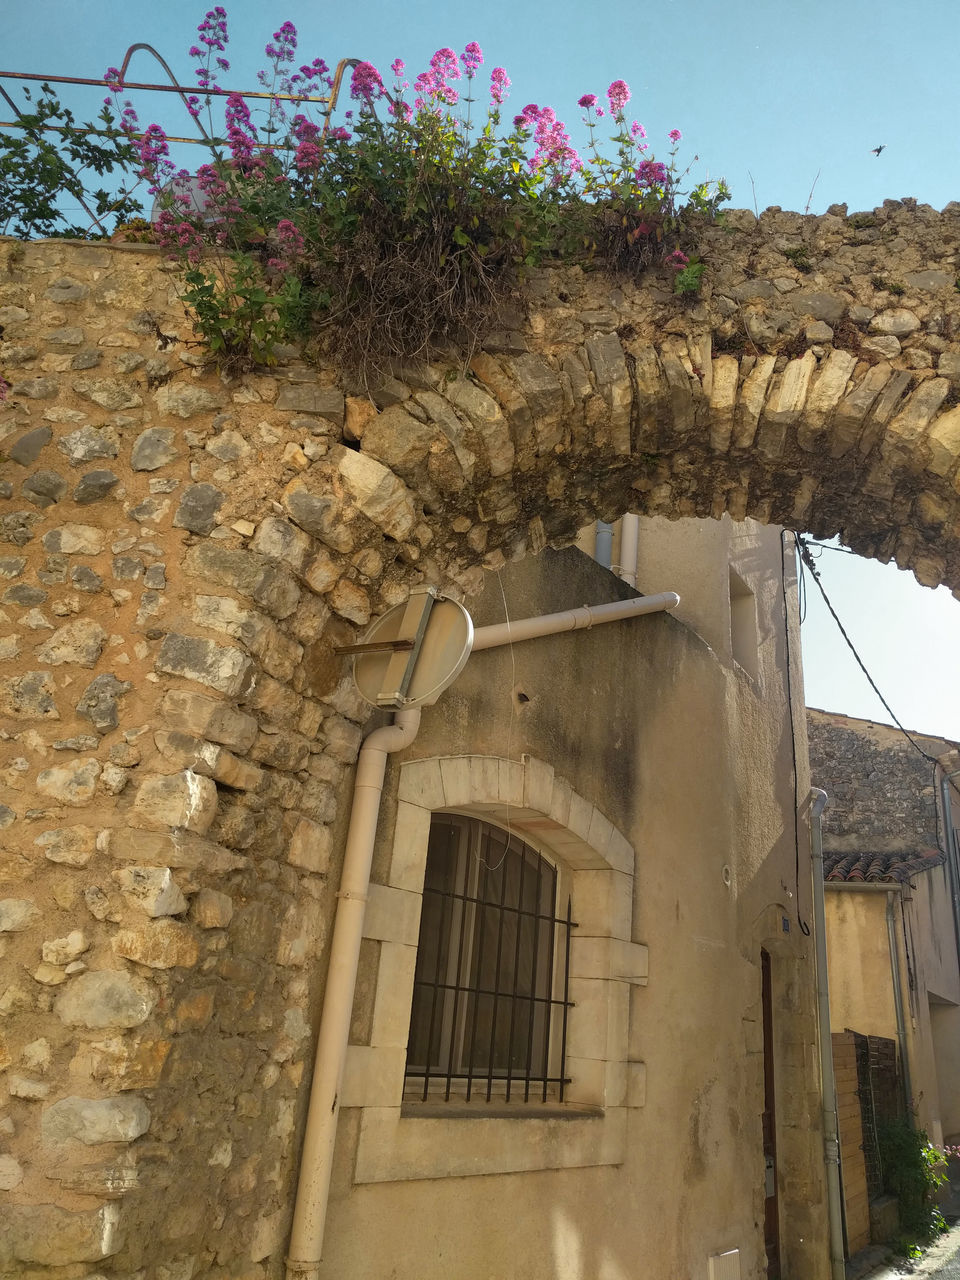 architecture, built structure, building exterior, wall, building, nature, plant, ancient history, no people, history, arch, the past, day, outdoors, sky, old, flower, house, window, flowering plant, wall - building feature, low angle view, ruins, village, travel destinations, entrance